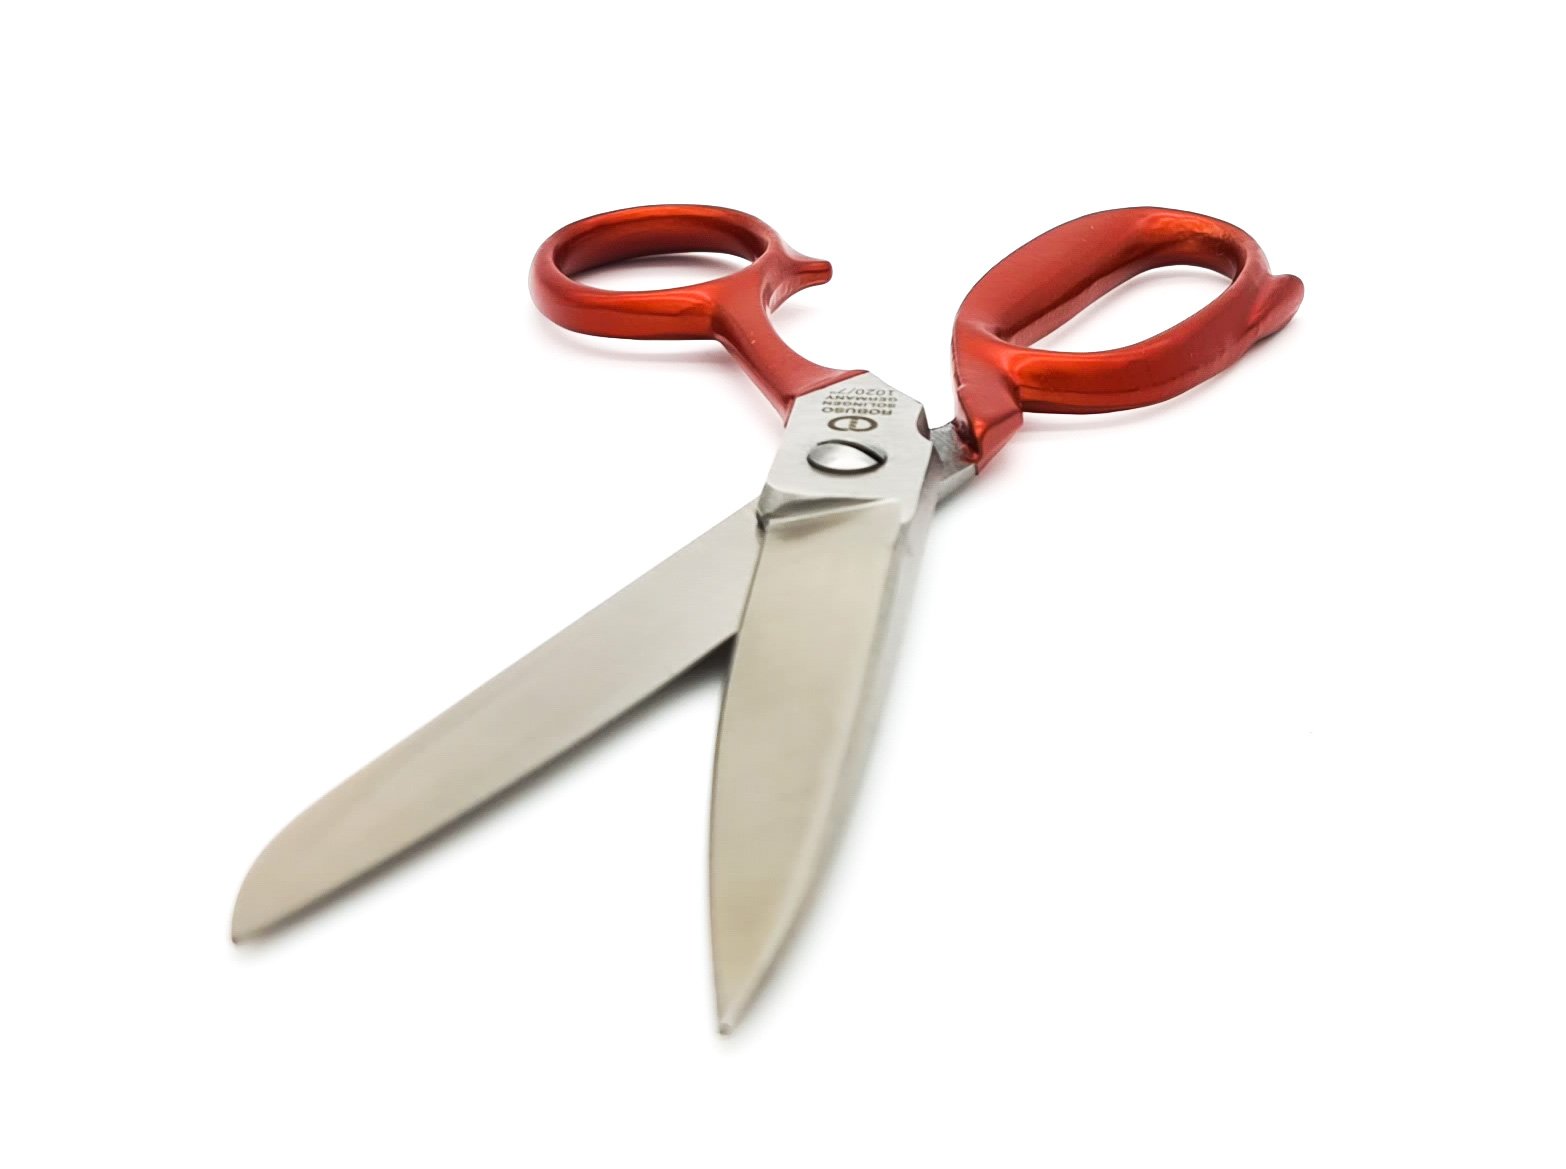 ROBUSO scissors from Solingen with long service life due to the manufacture  of very hard steel.